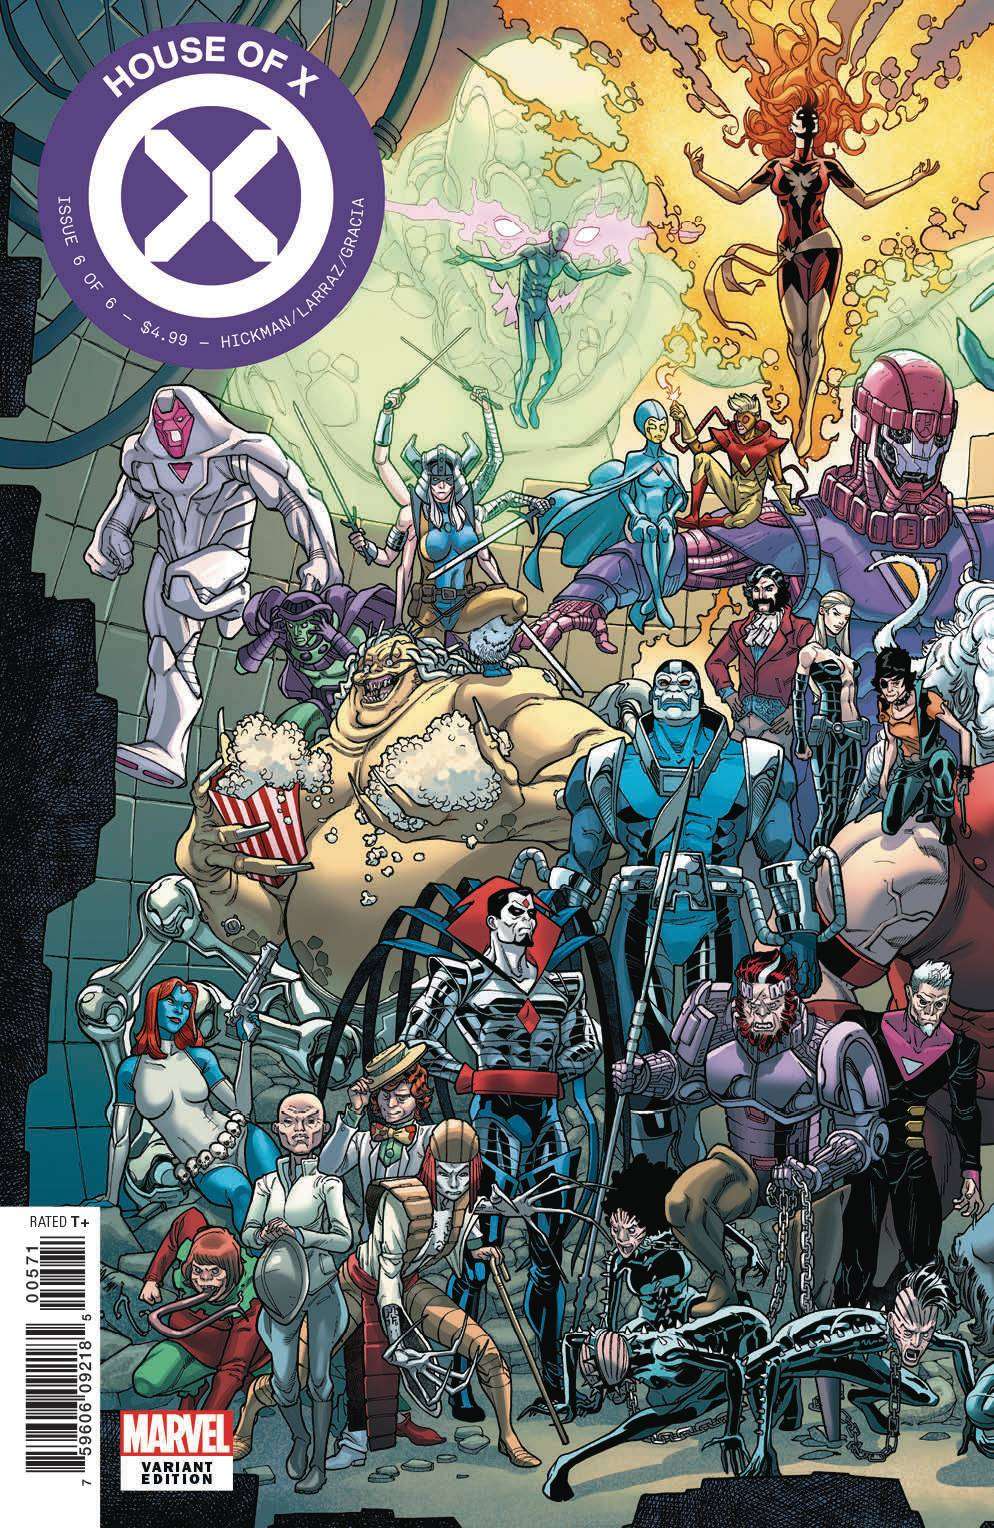 HOUSE OF X #6 (OF 6) GARRON CONNECTING VARIANT